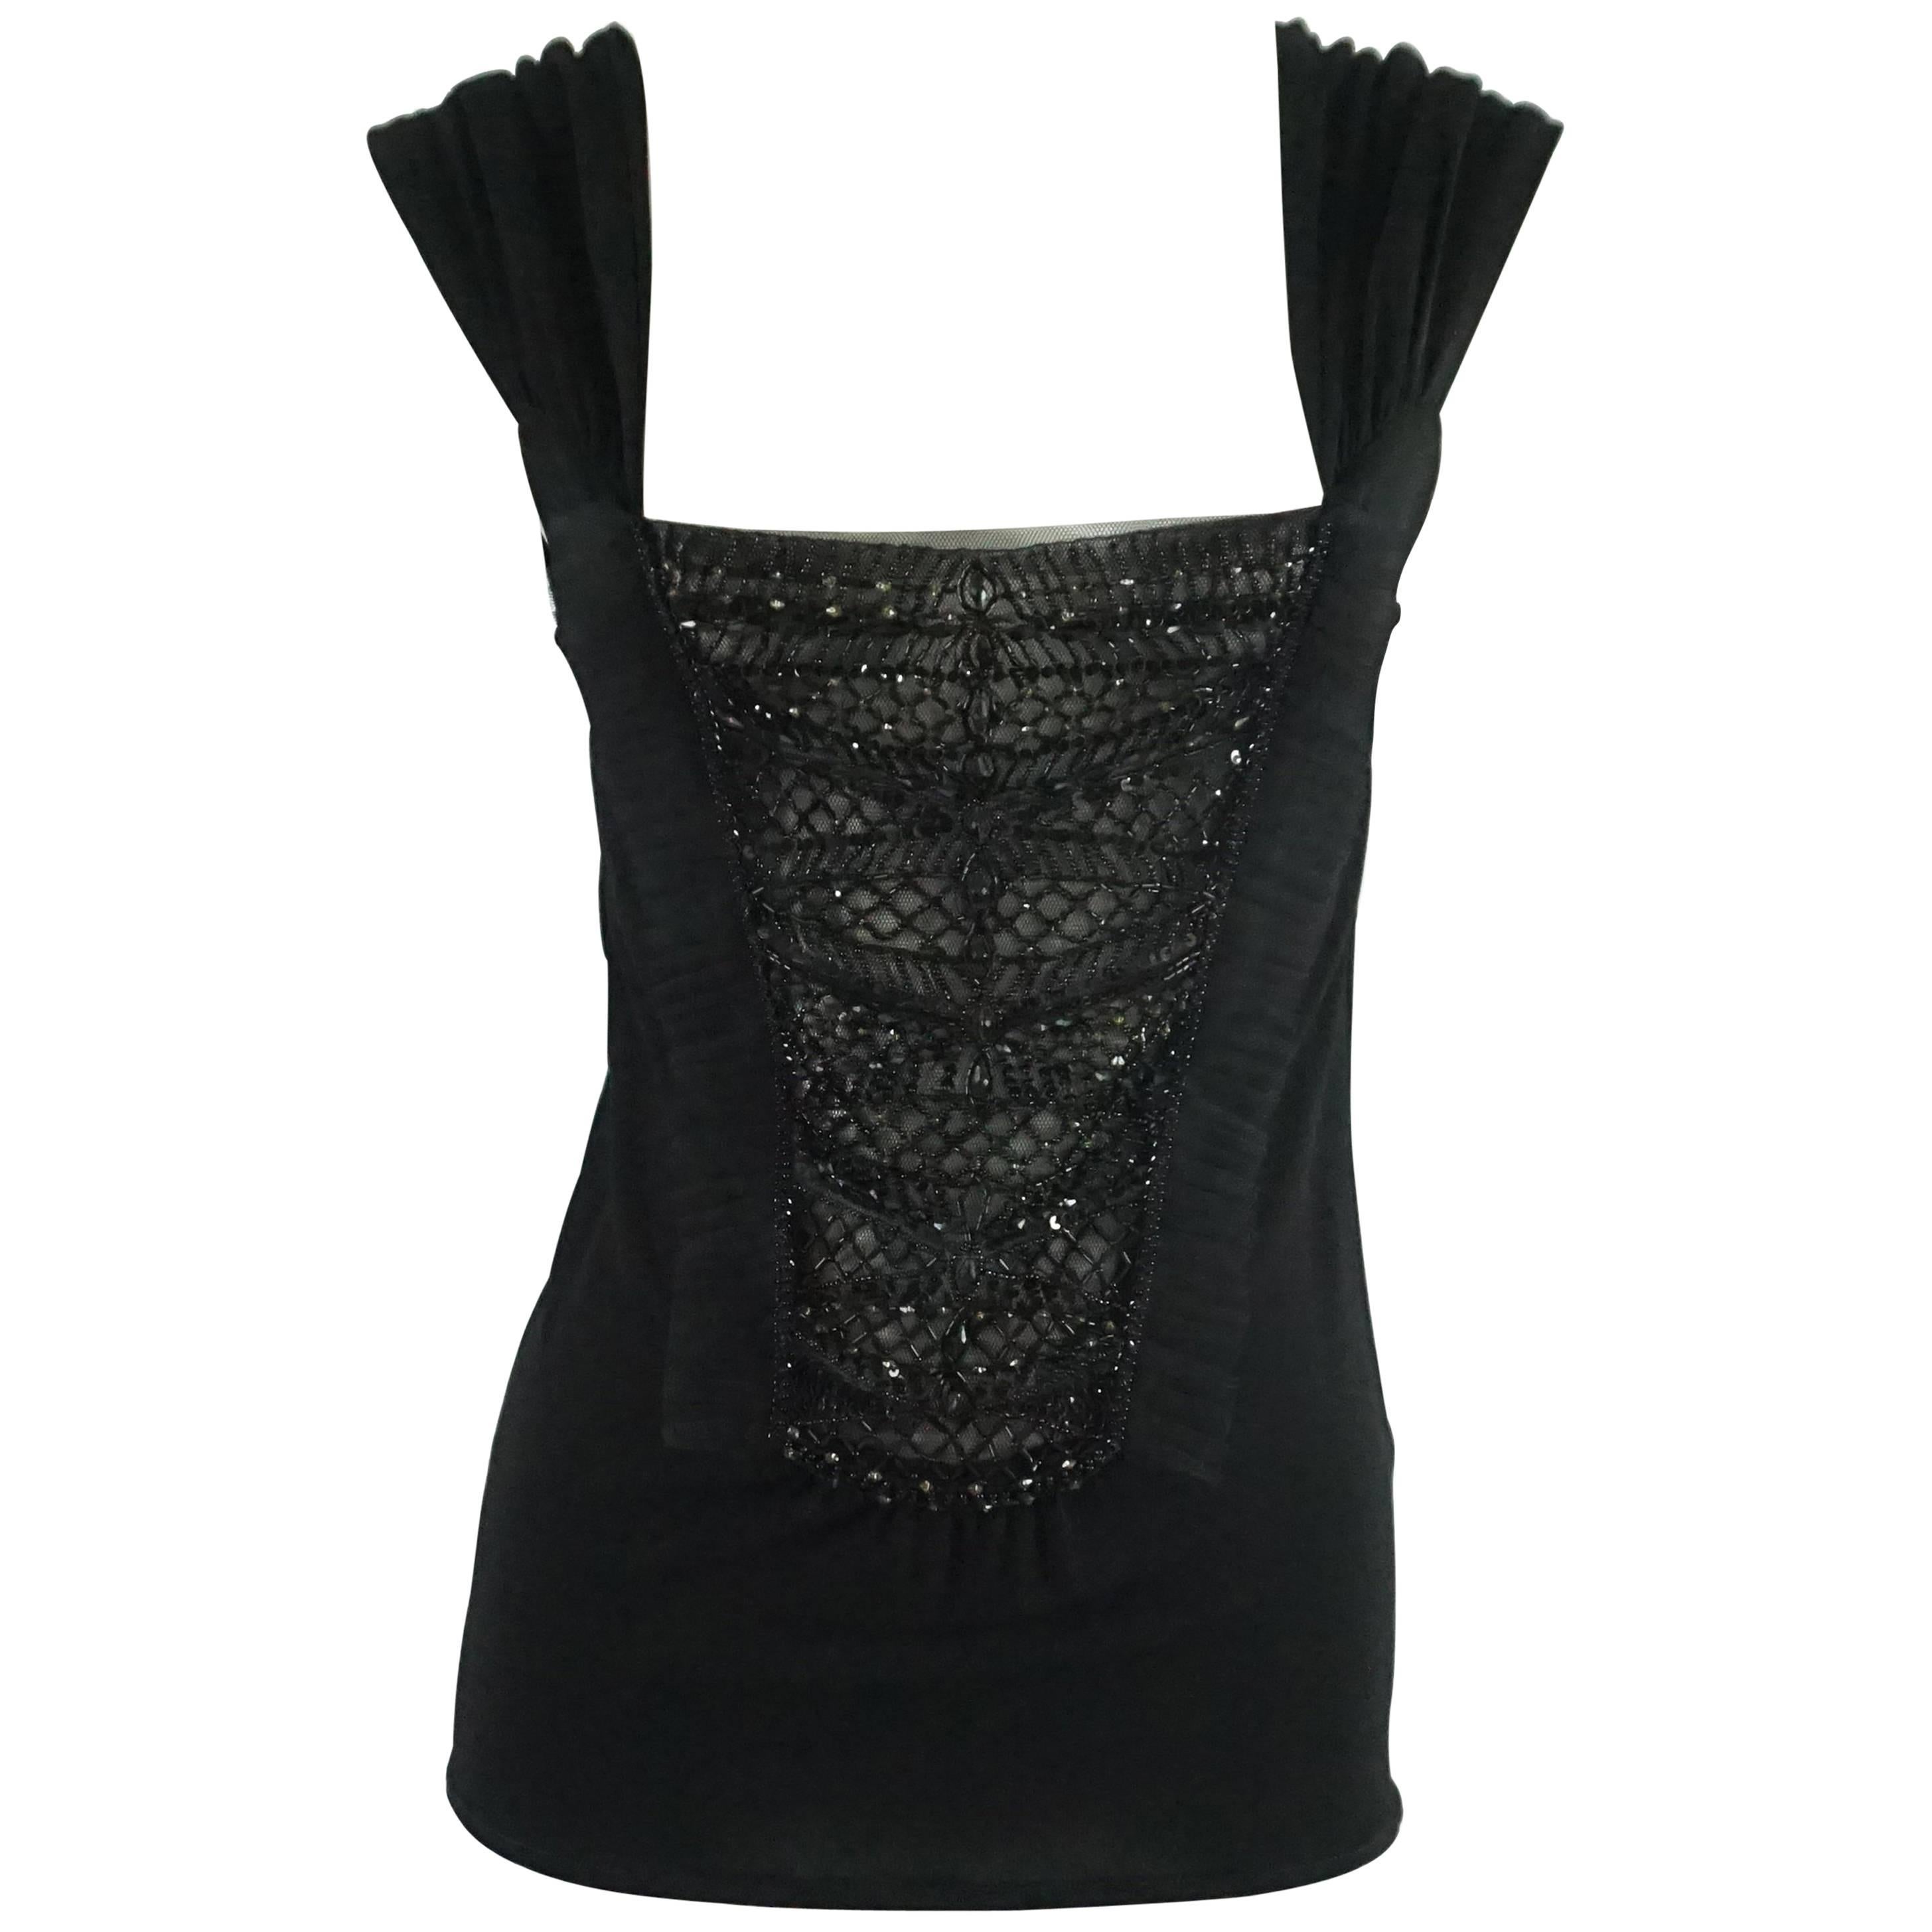 Valentino Black Silk Knit Top with Beading and Lace - 44